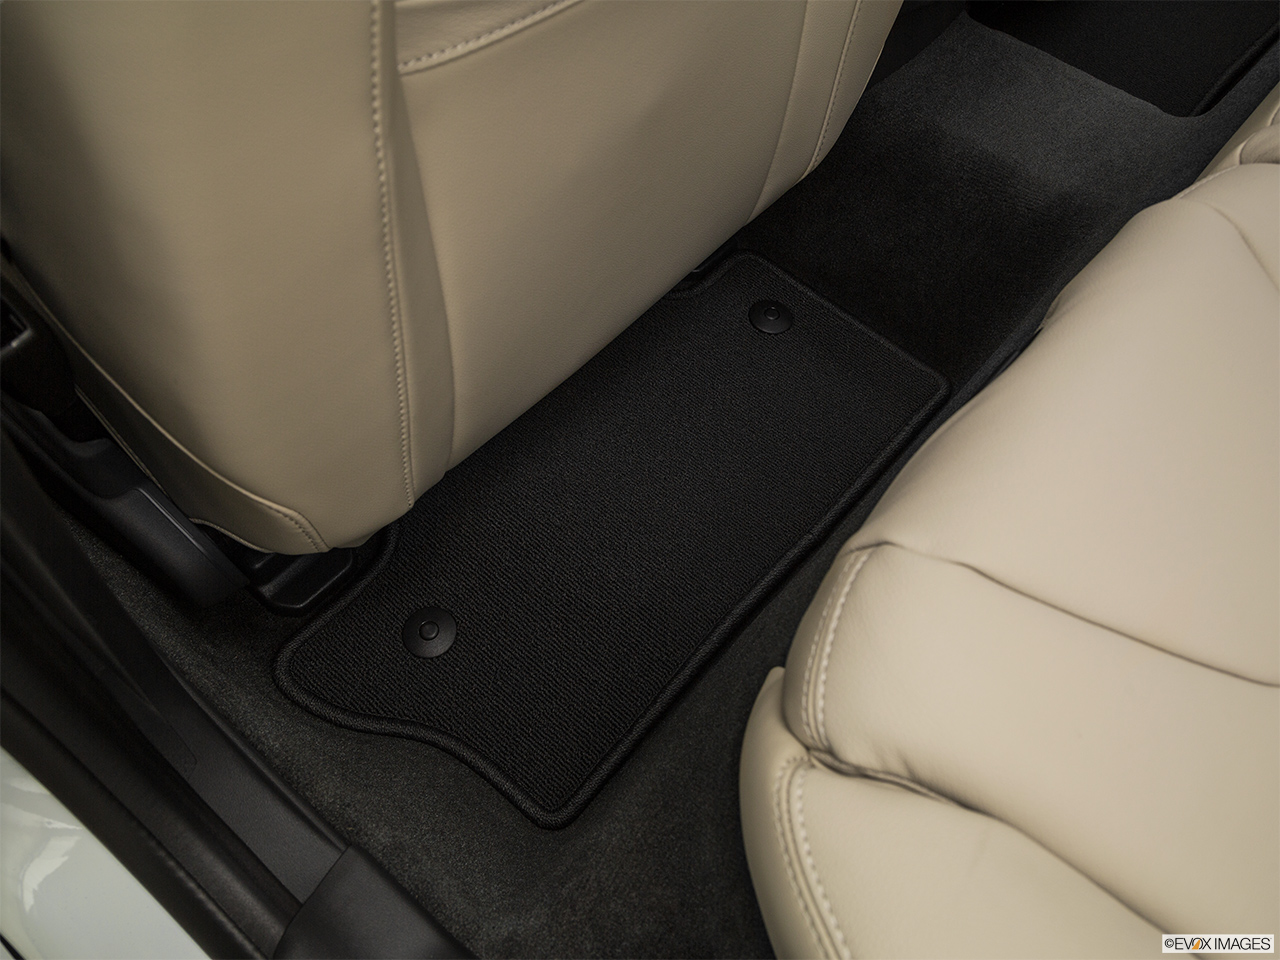 2017 Volvo V60 T5 Premier Rear driver's side floor mat. Mid-seat level from outside looking in. 